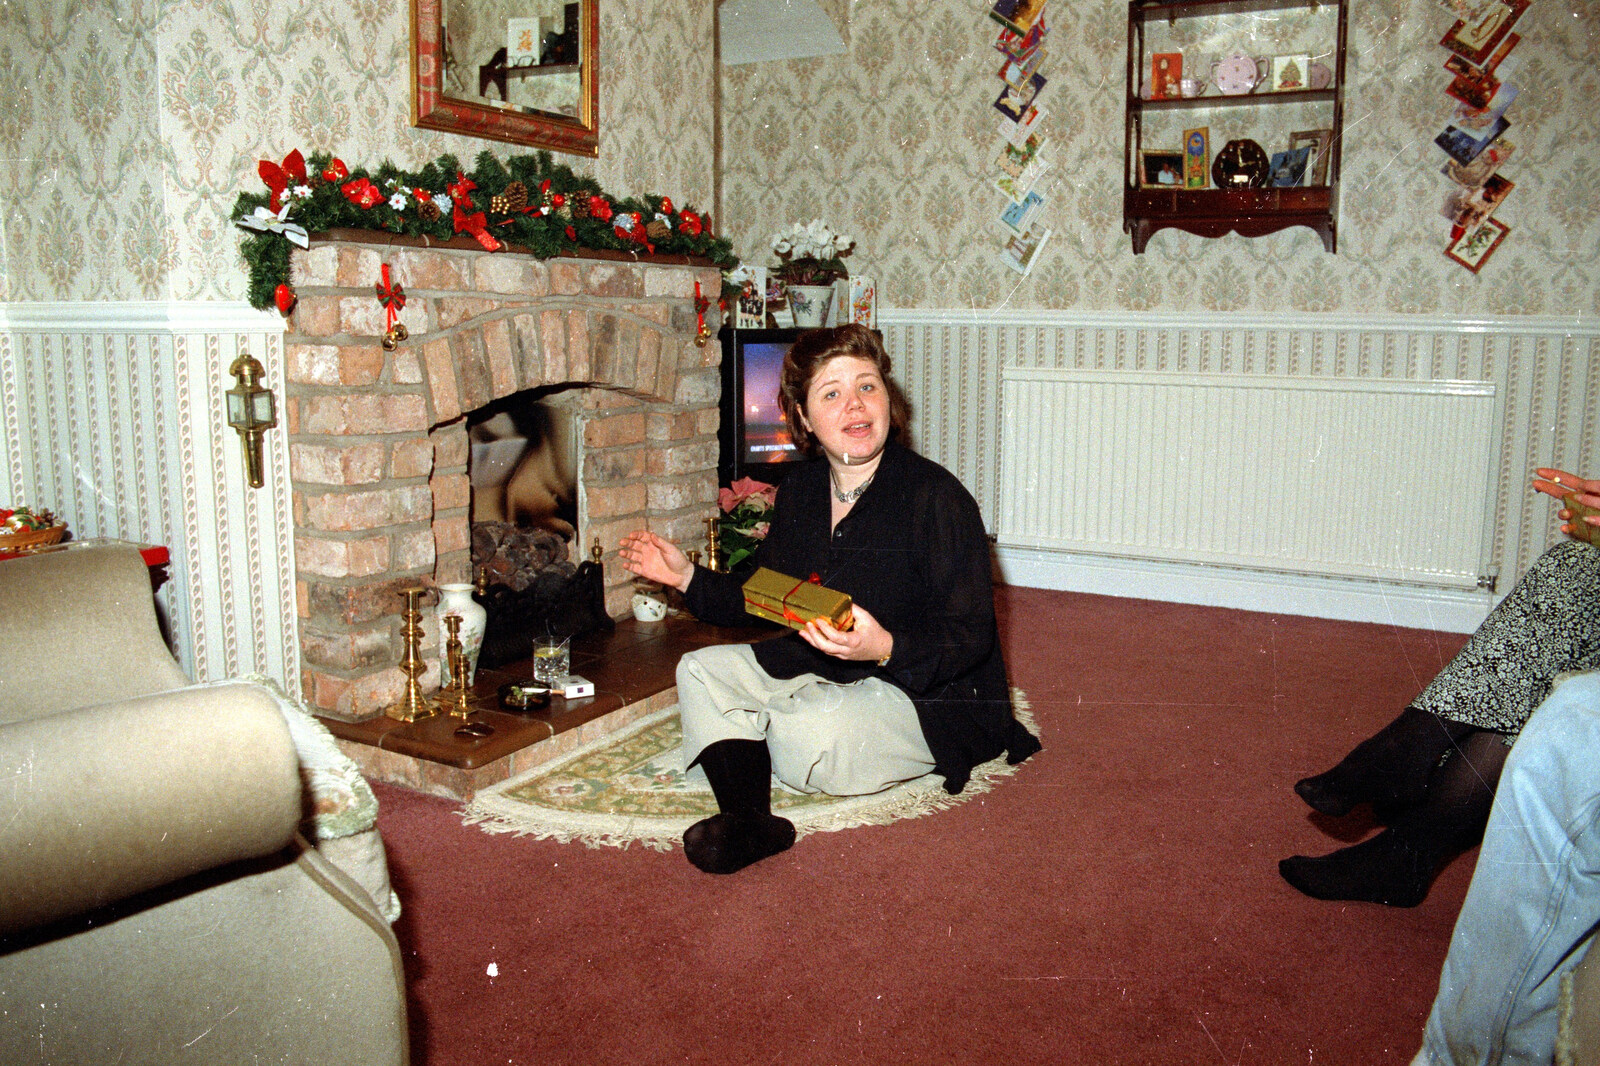 Sis opens a present from Christmas Up North, Macclesfield, Cheshire - 25th December 1995